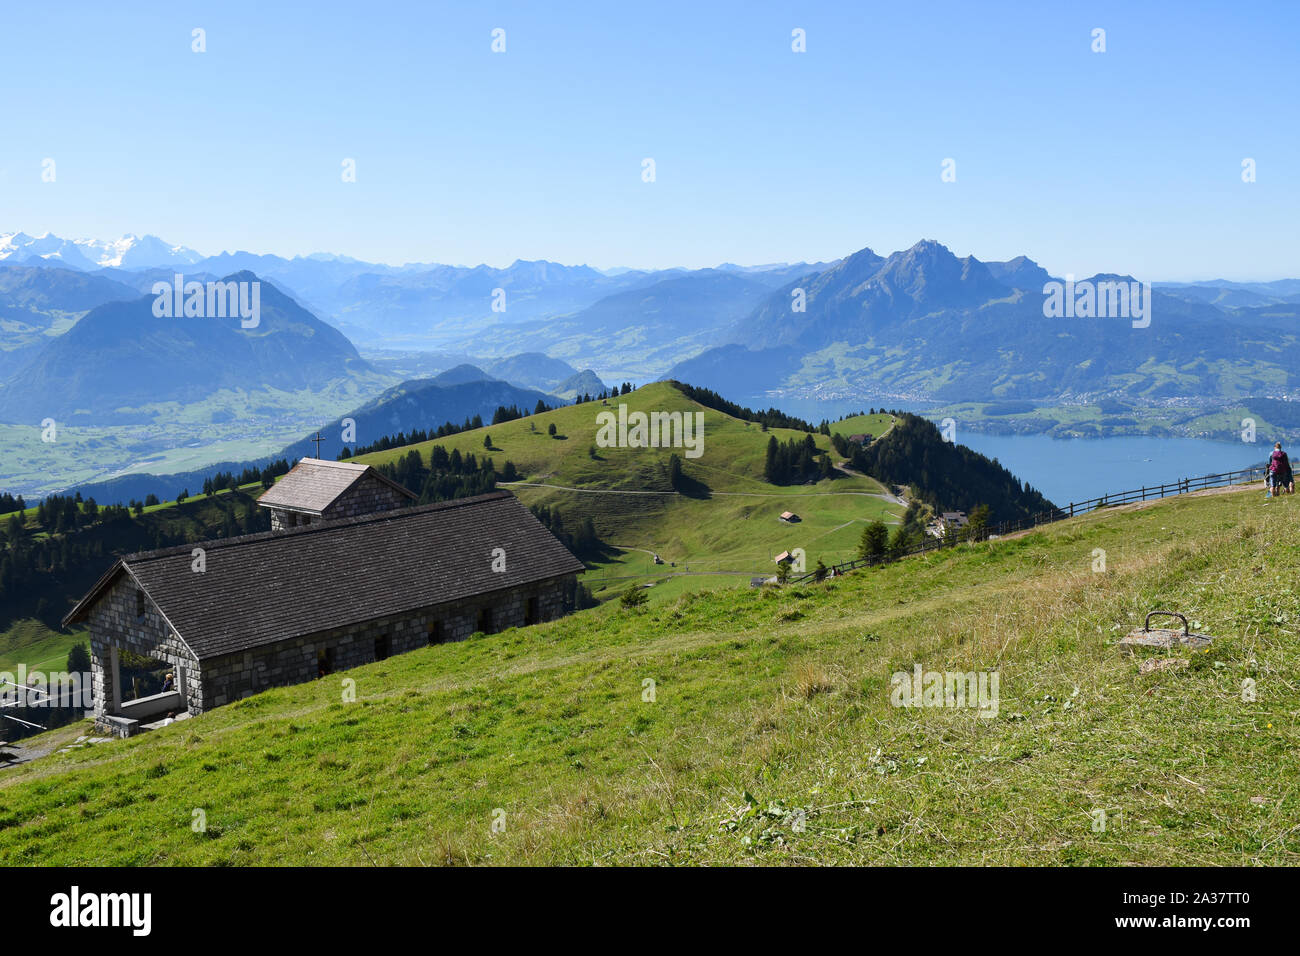 Panoramic landscape view of meadows, mountain ranges with snowy mountain peaks and Lake Lucerne in the background from the top of Rigi Kulm, Mount Rig Stock Photo